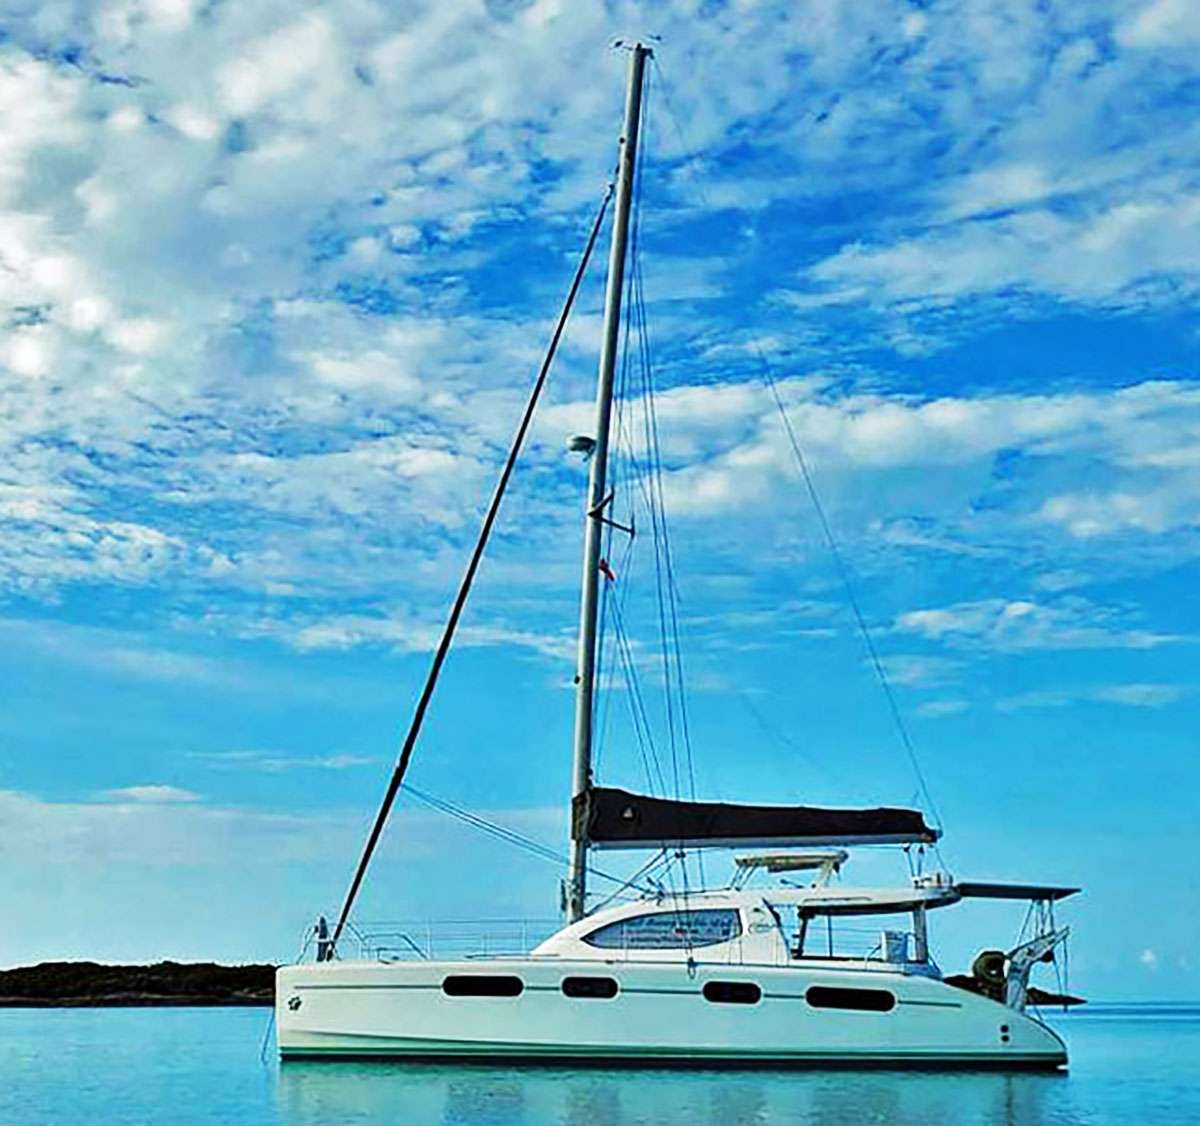 THE SPACE BETWEEN Yacht Charter - Ritzy Charters